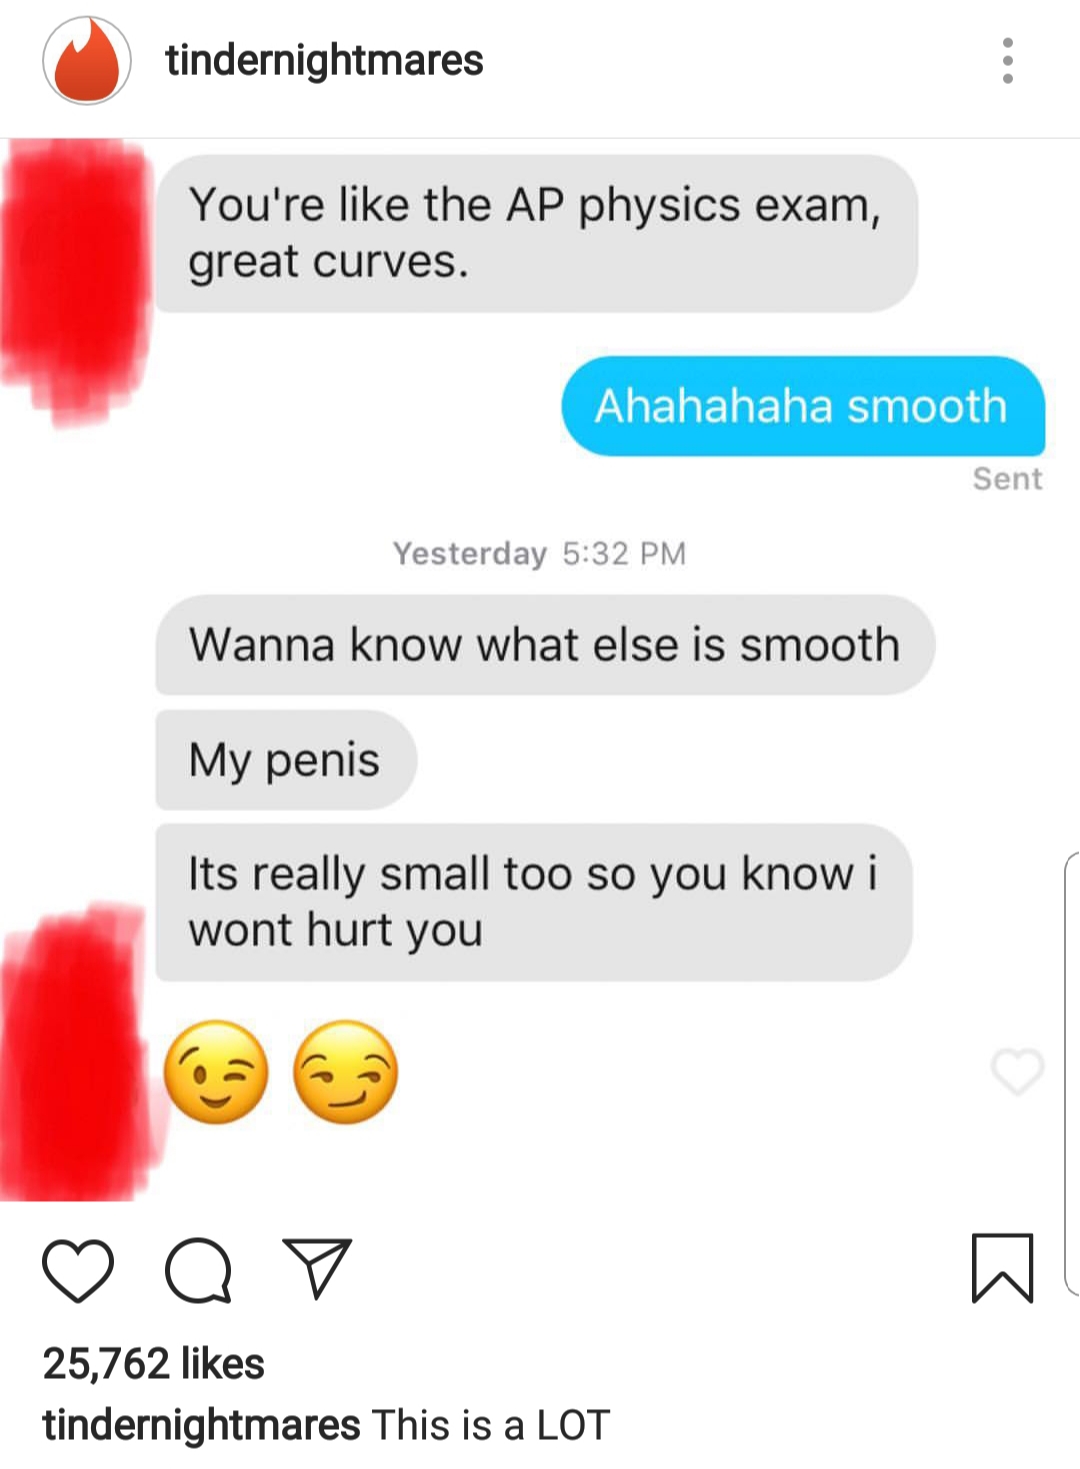 memes - ap physics exam memes 2019 - tindernightmares You're the Ap physics exam, great curves. Ahahahaha smooth Sent Yesterday Wanna know what else is smooth My penis Its really small too so you know i wont hurt you Q V 25,762 tindernightmares This is a 